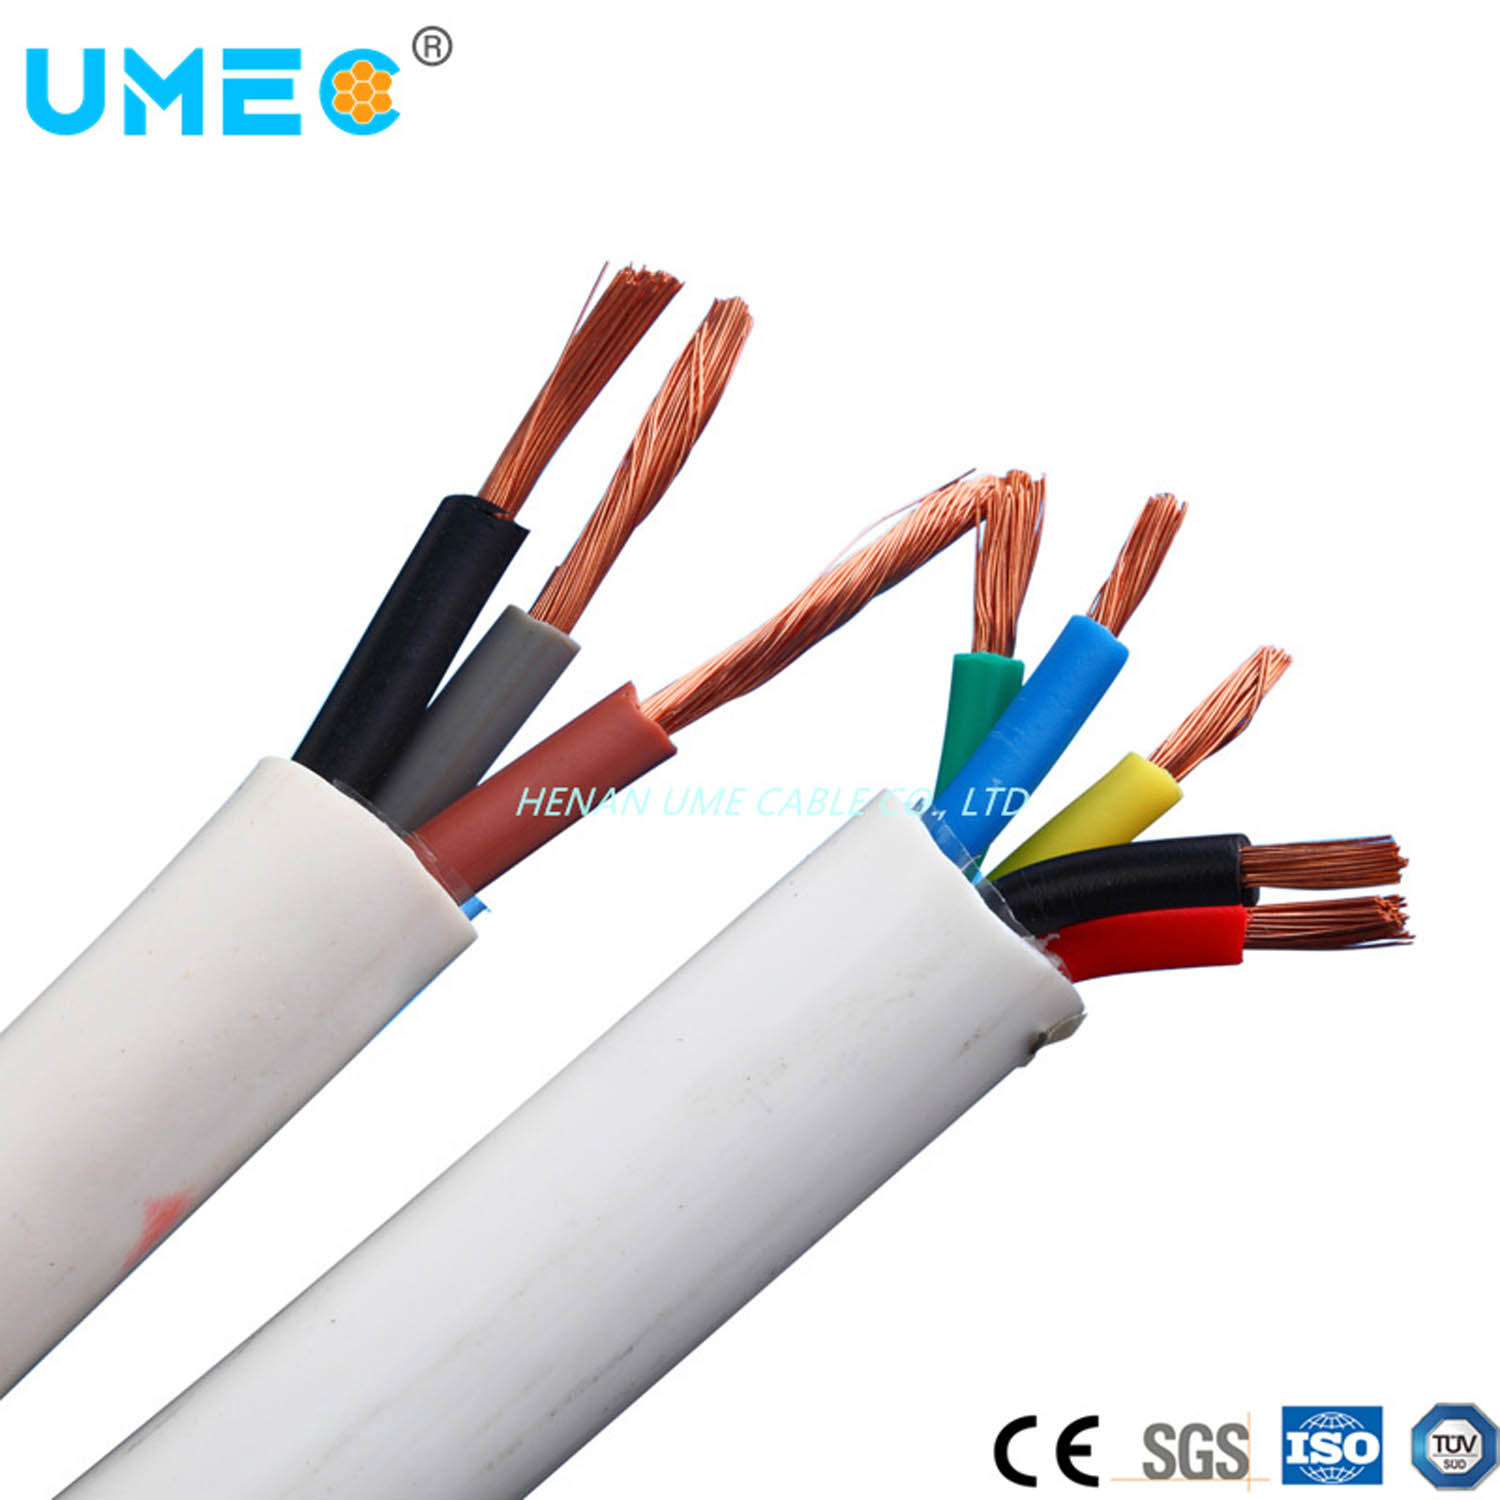 Factory Price Tinned Copper Conductor PVC Insulation Wire 2 Core 0.5/0.75/1.0/1.5/2.5/4.0/6.0 AC 450/750V with White/Black/Grey Color